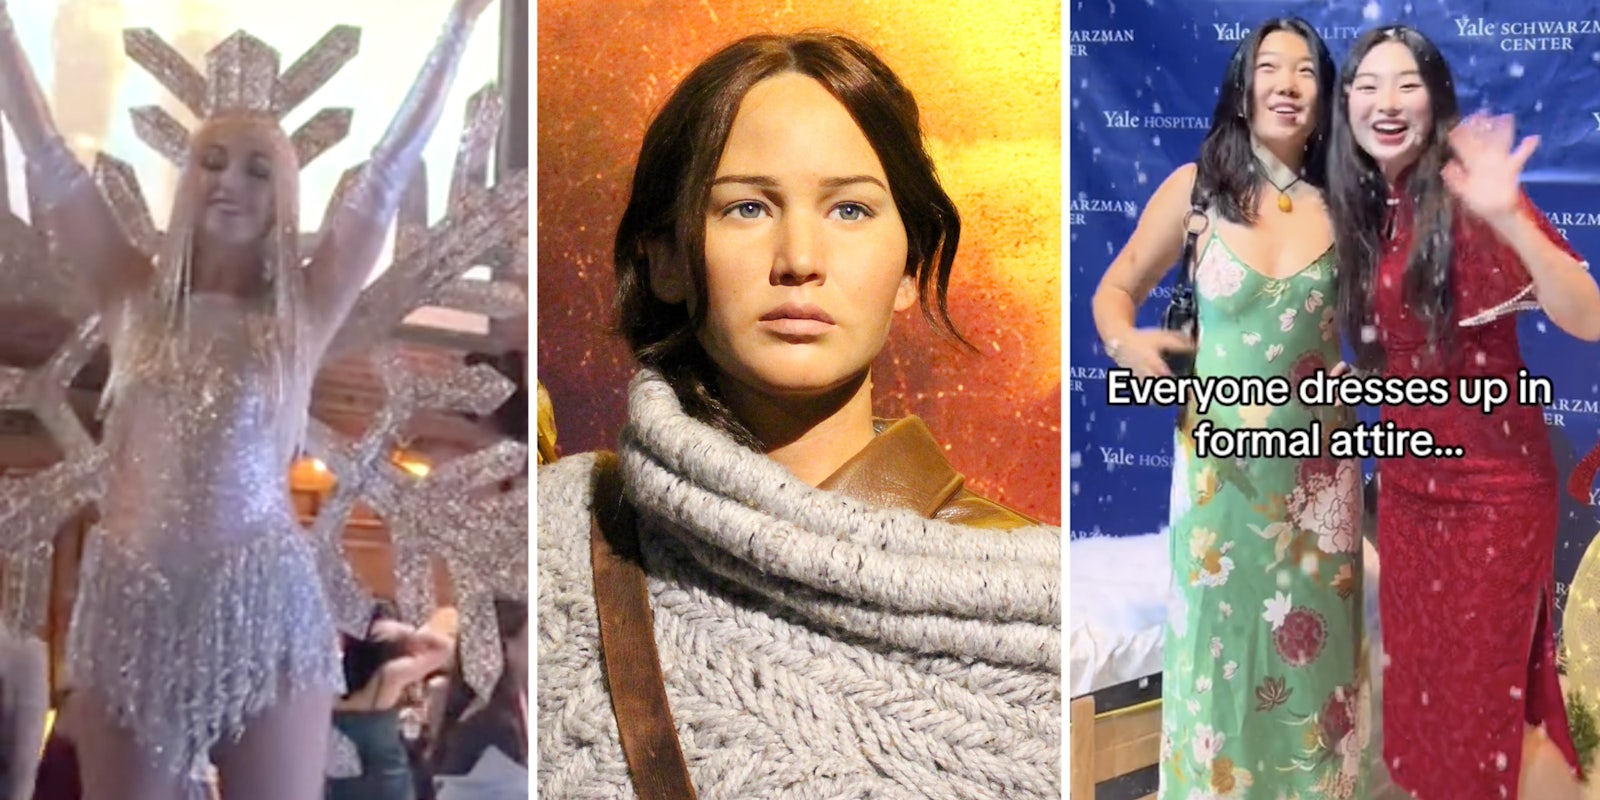 Woman at party(l), Katniss Everdeen from Hunger Games(c), Woman in formal attire(r)